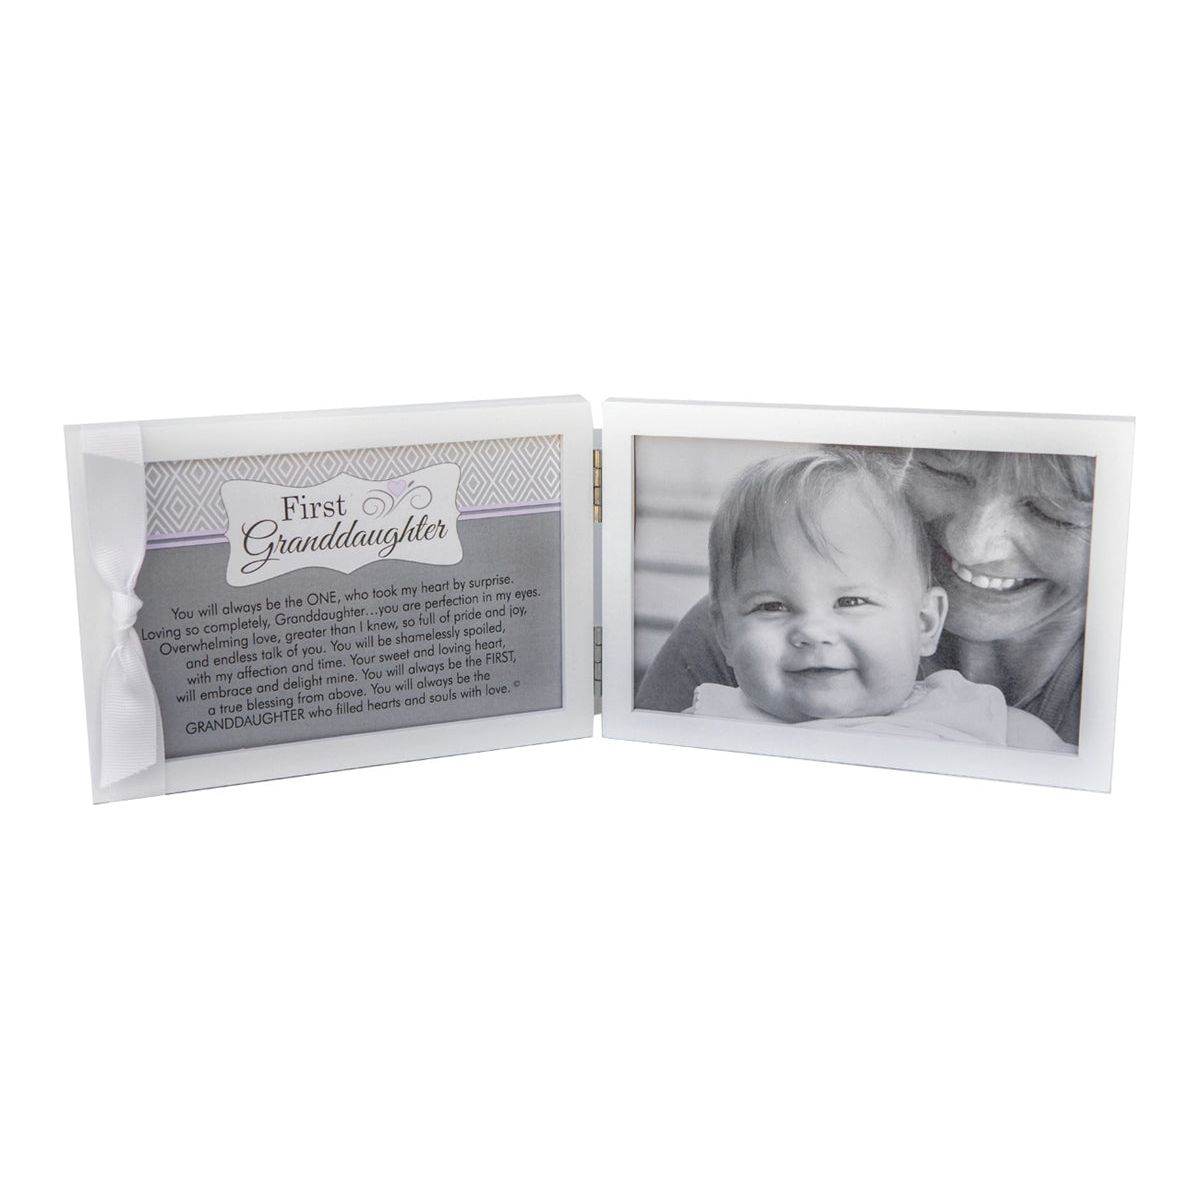 White 4x6 double wood frame with First Granddaughter sentiment and grosgrain ribbon on the left and space for a photo on the right.